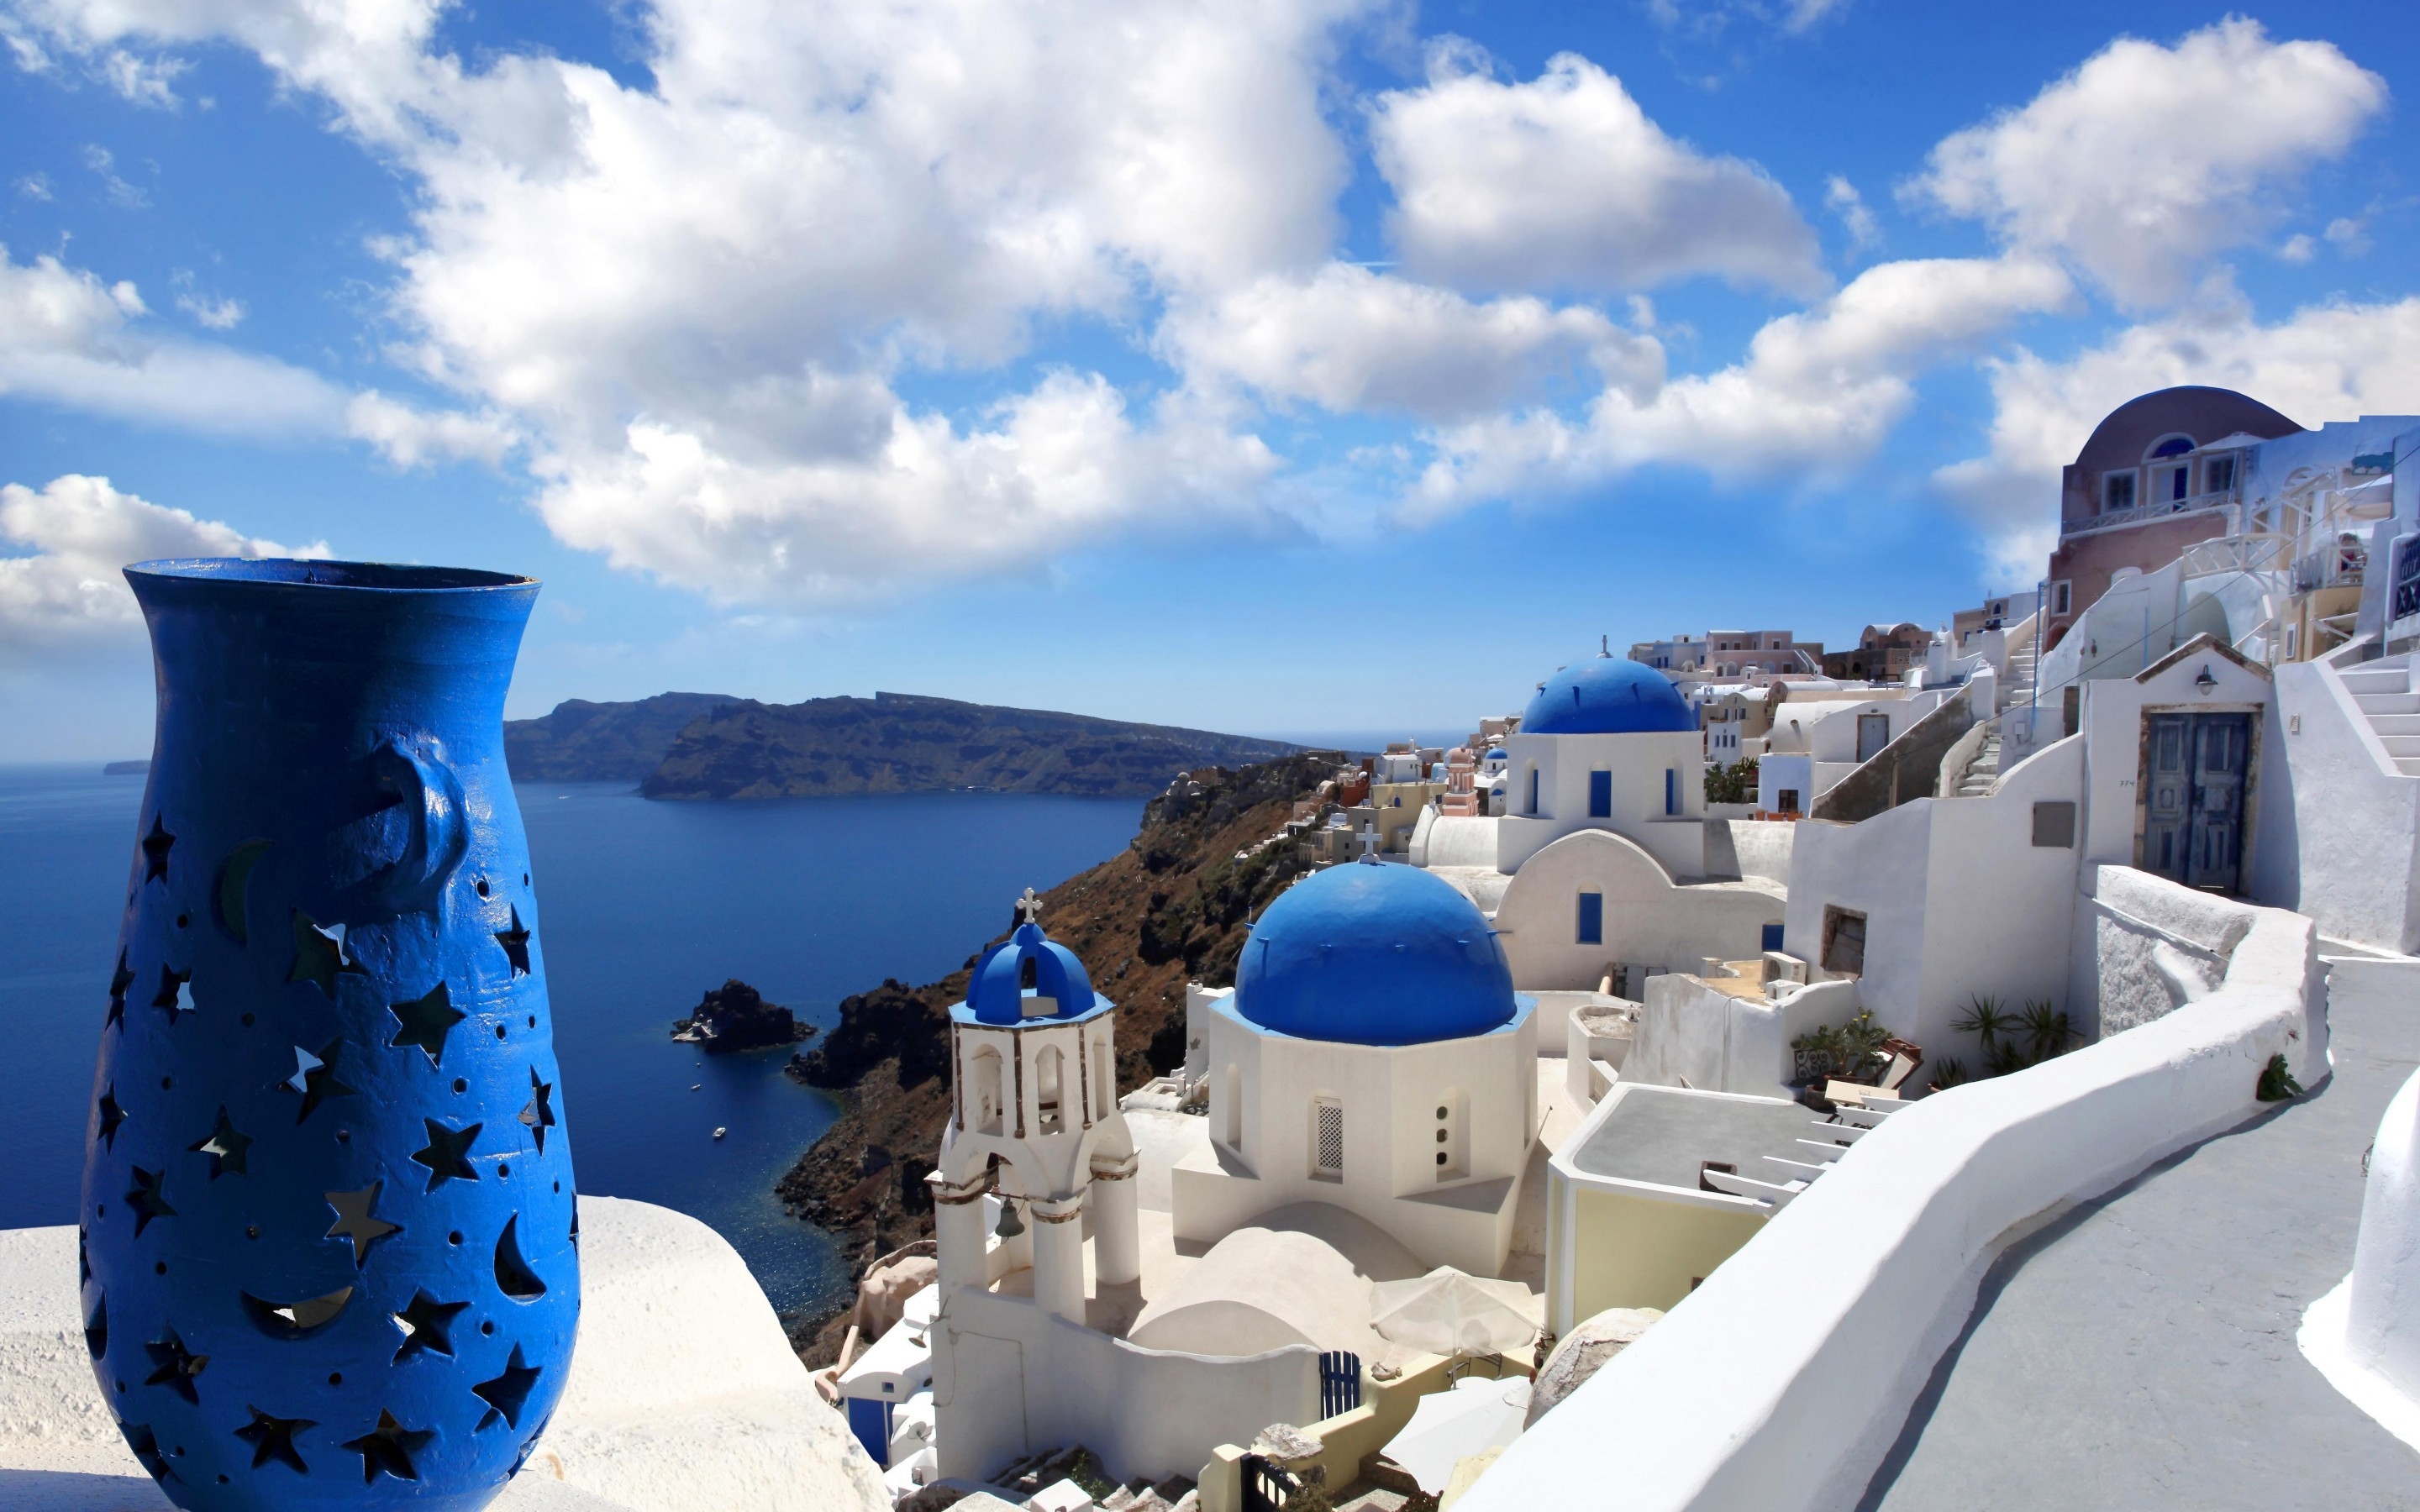 Ideal View from Santorini for 2880 x 1800 Retina Display resolution